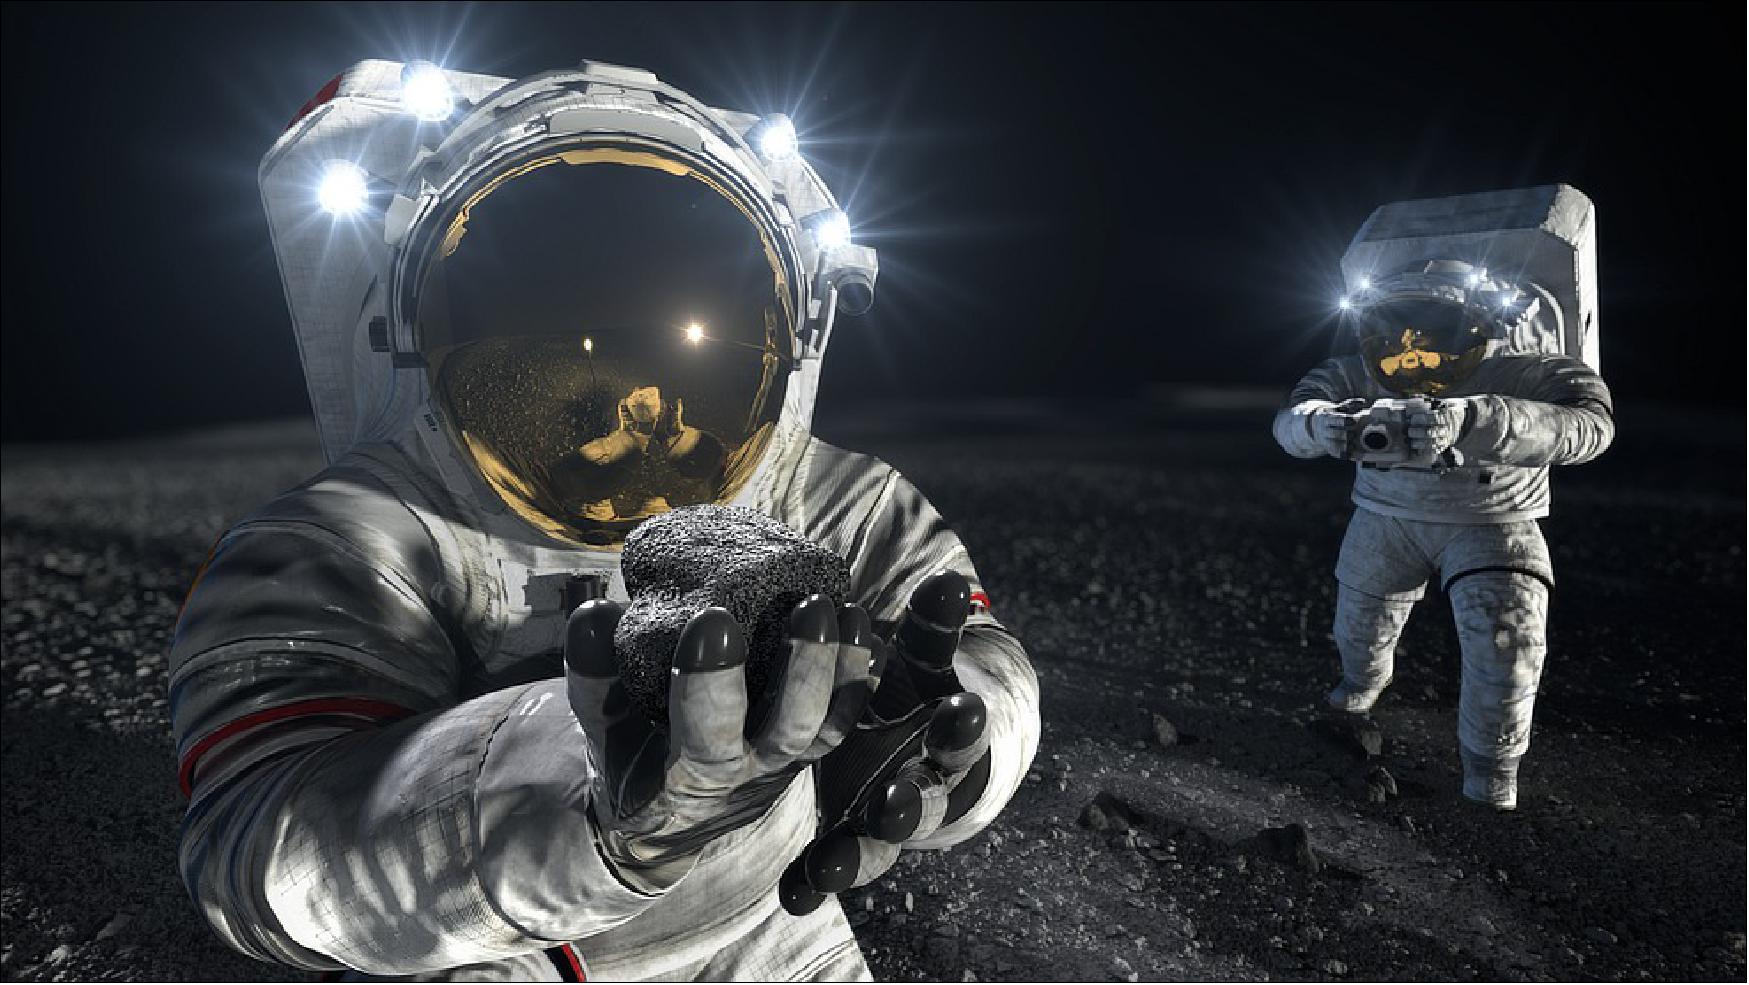 Figure 9: An artist’s illustration of two suited crew members working on the lunar surface. The one in the foreground lifts a rock to examine it while the other photographs the collection site in the background (image credit: NASA)